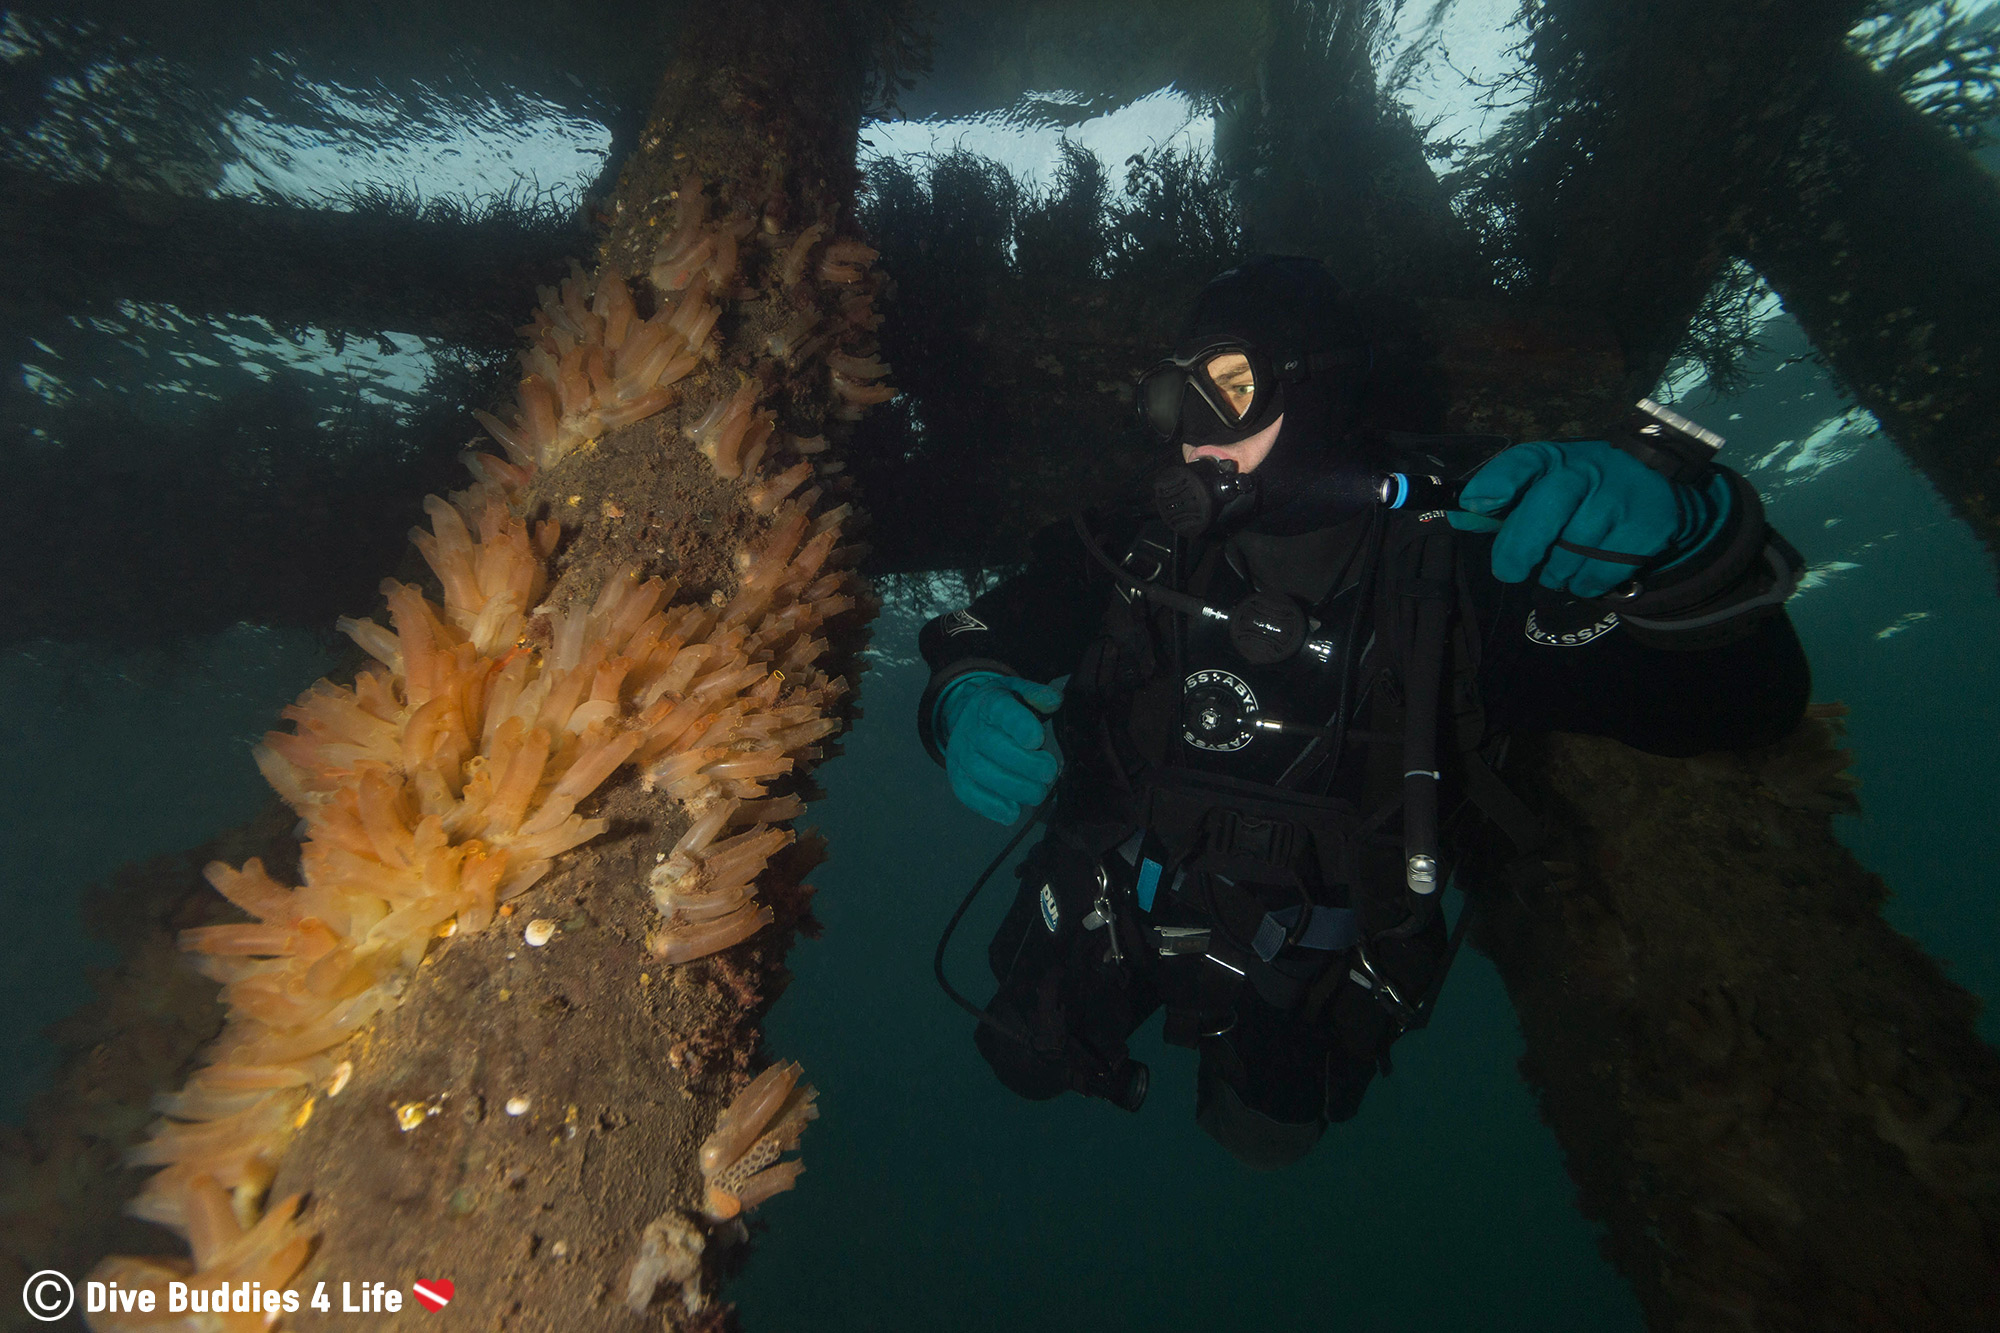 Joey Illuminating A Tunicate Covered Pier With His Xtar D20B Underwater Light